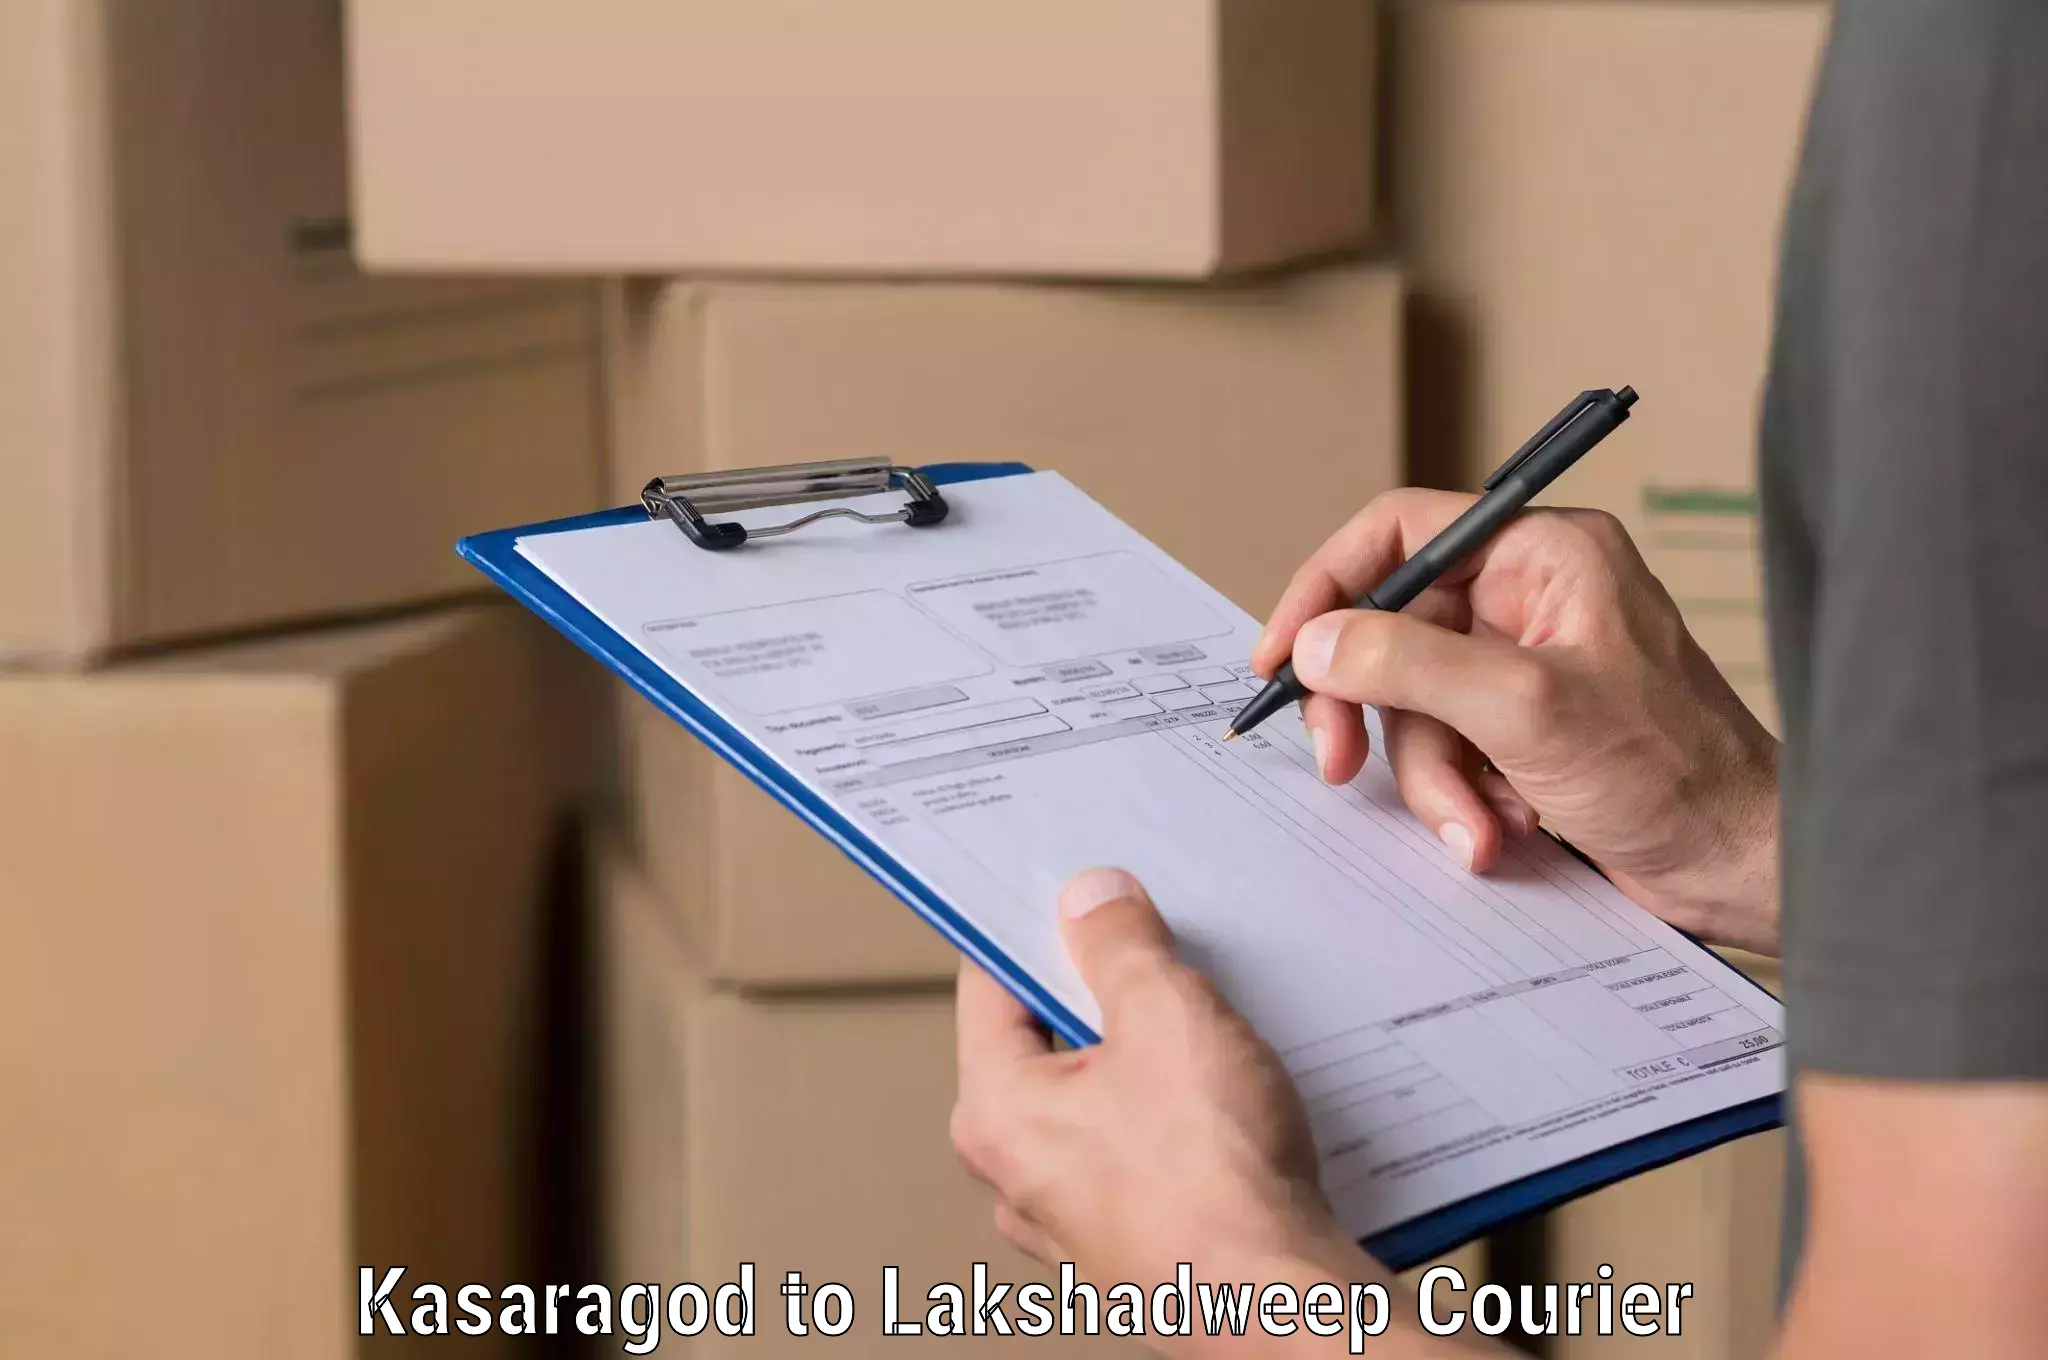 State-of-the-art courier technology Kasaragod to Lakshadweep